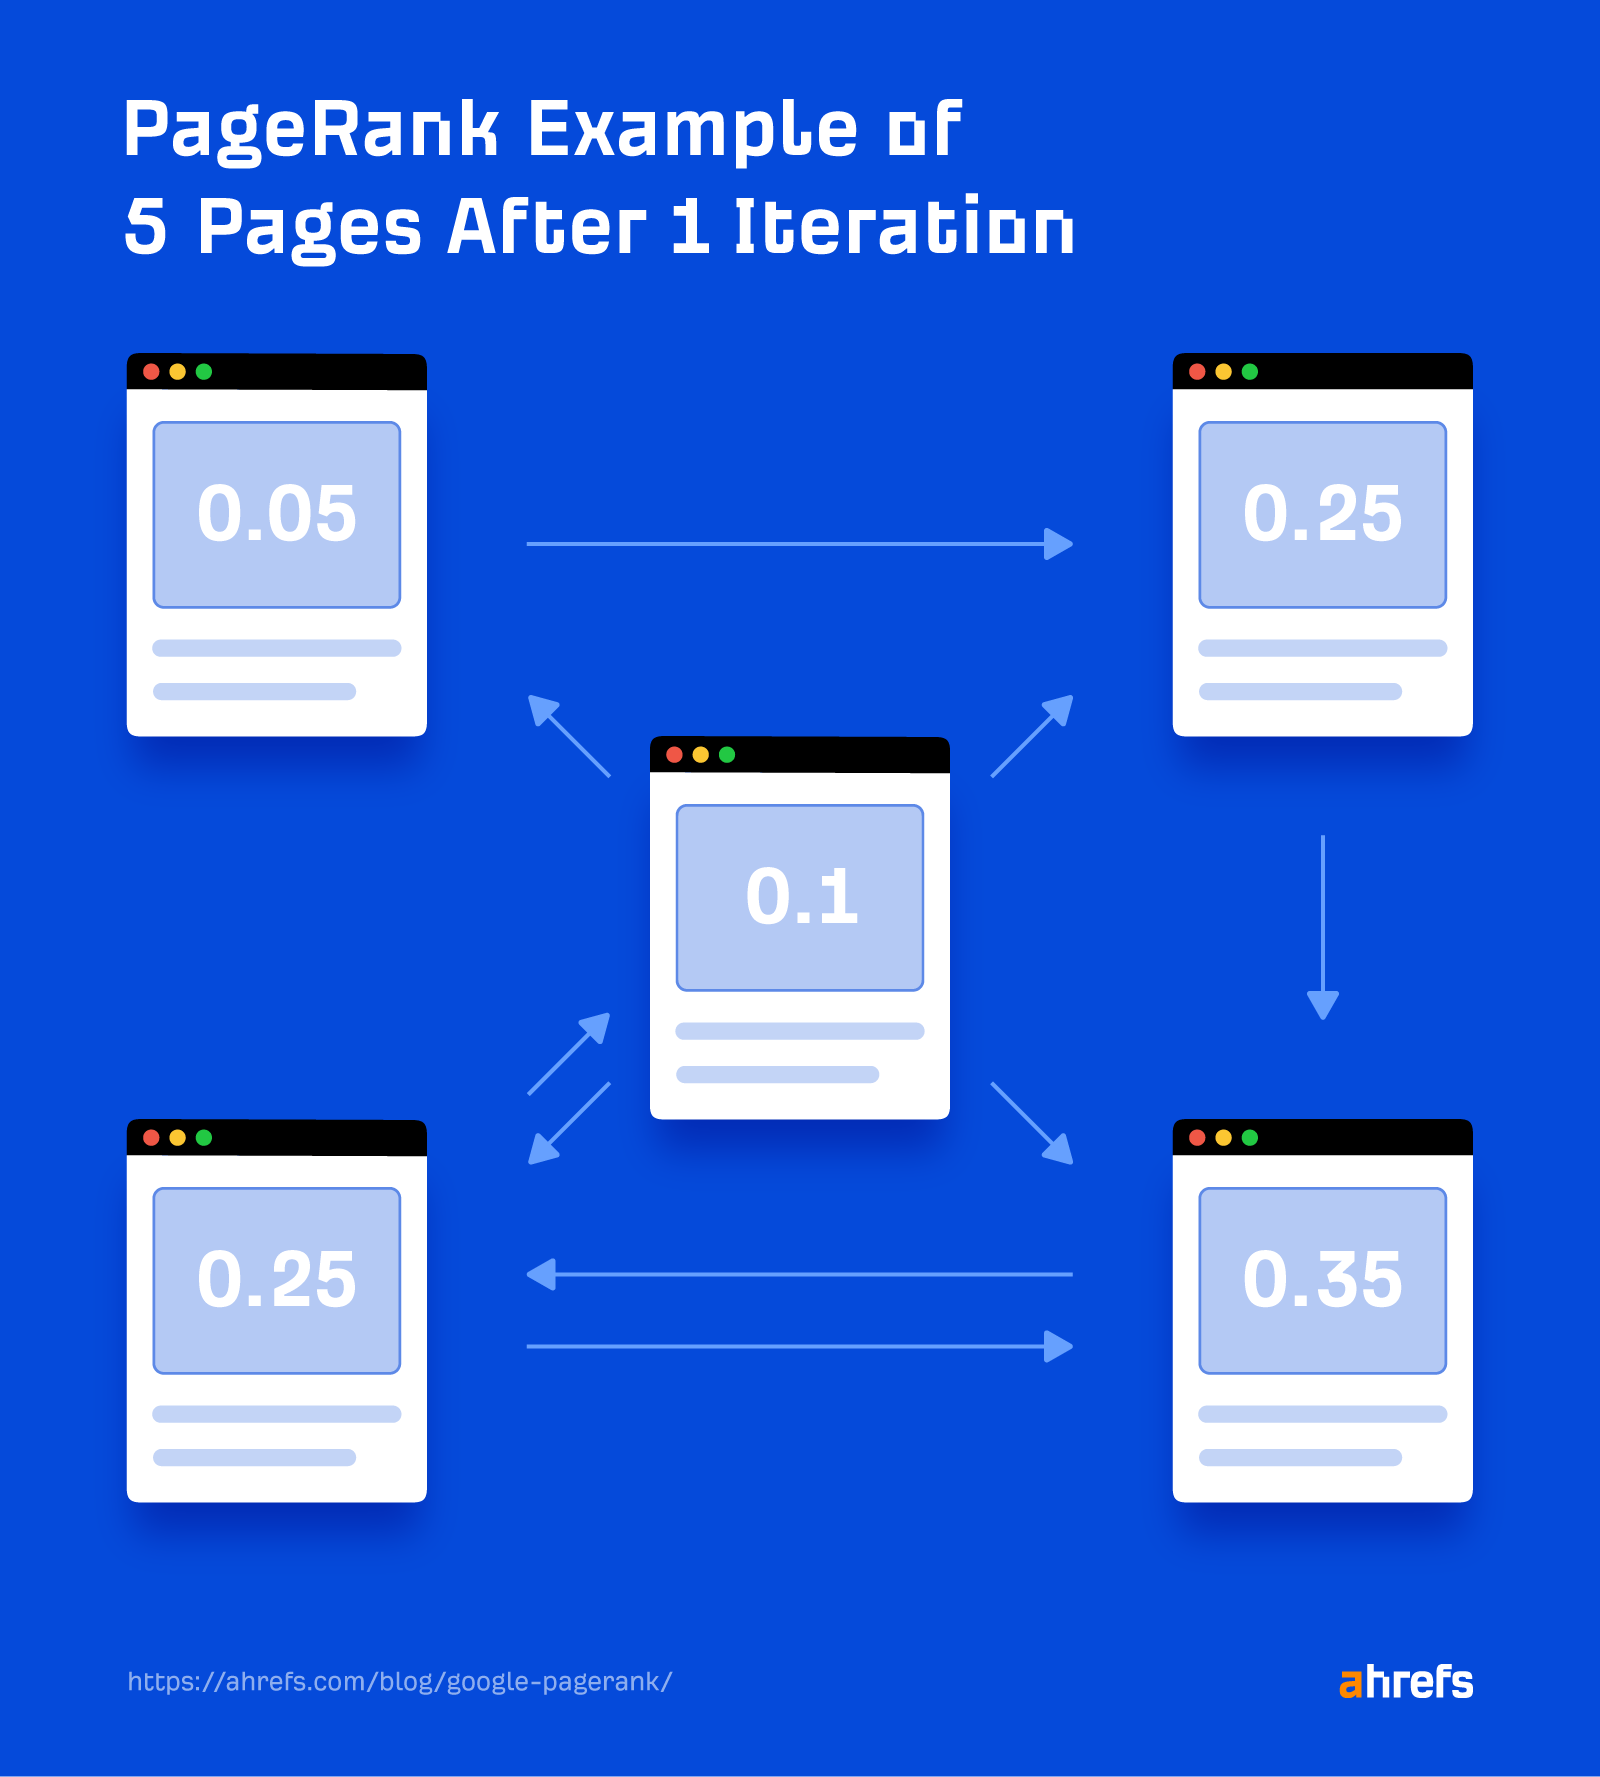 PageRank example of five pages after one iteration